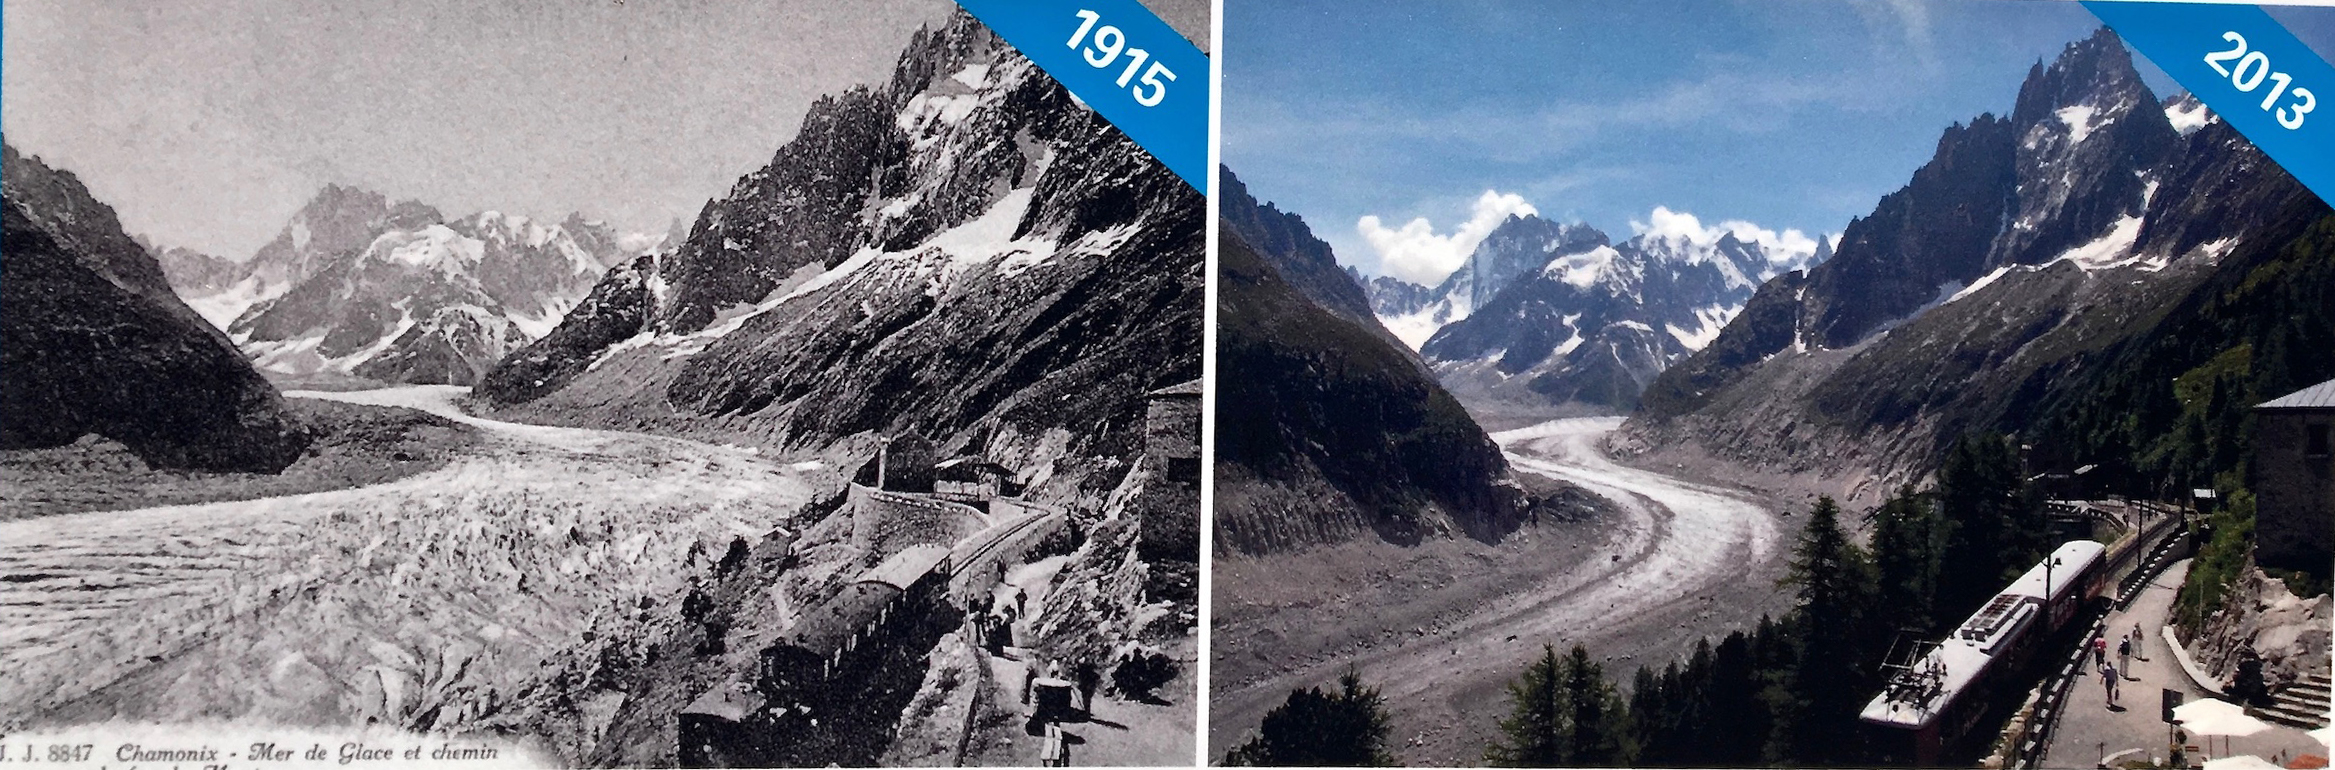 Comparison of the Mer de Glace. (Source: Wendy Redal)